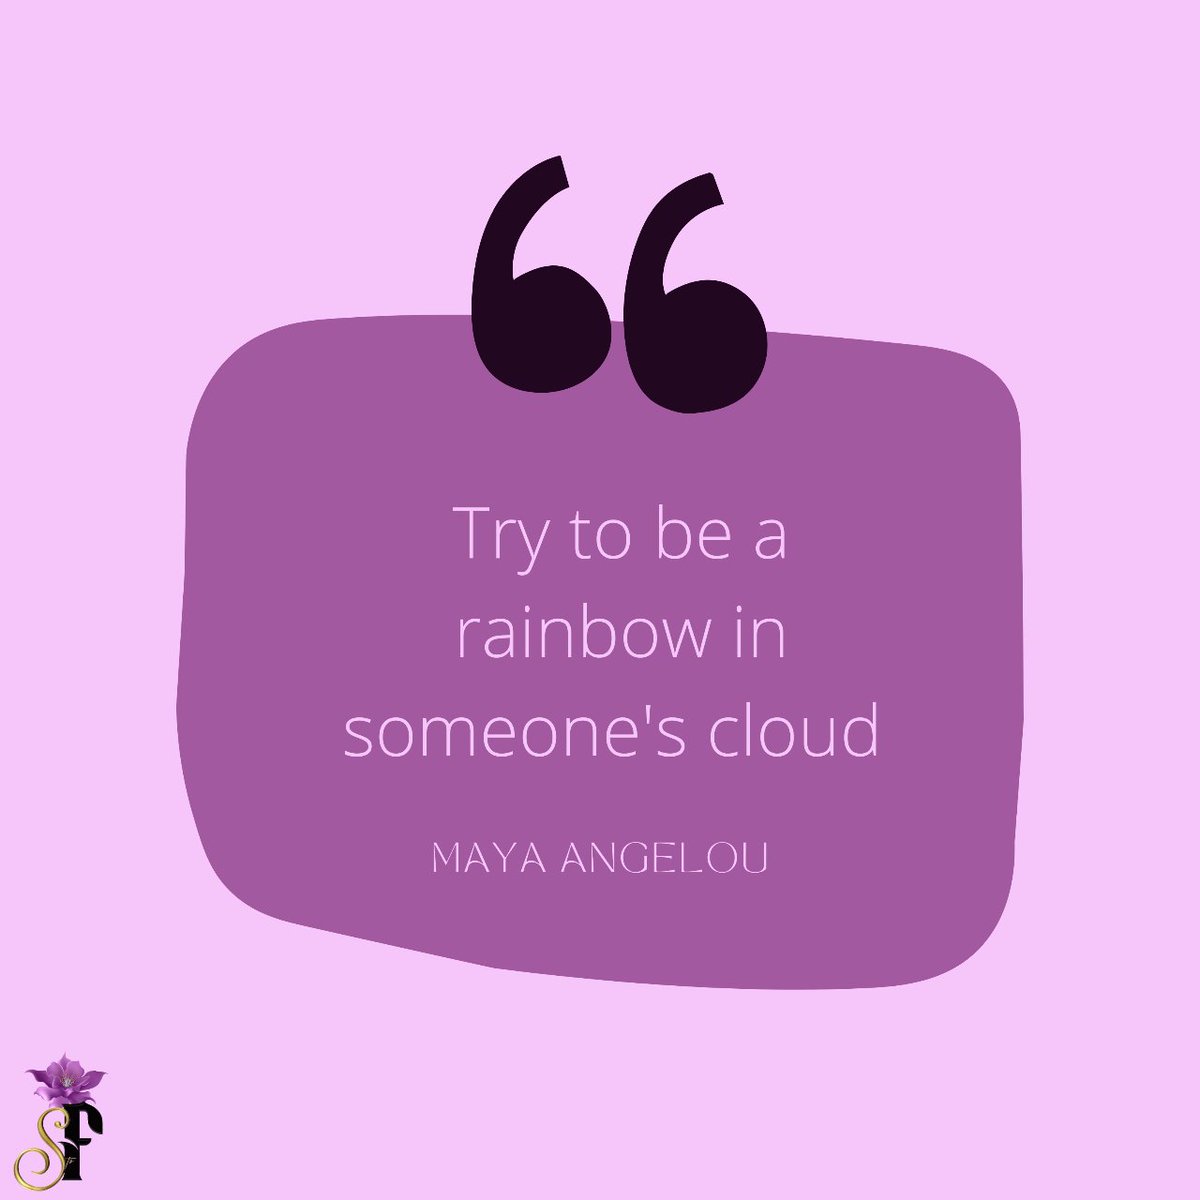 “Try to be a rainbow in someone’s cloud.” -Maya Angelou

#mentalhealthmatters #mentalhealth #therapyservices #counselingservices #healingcircles #therapy #newyorknonprofit #inspiration #motivation #quotesaboutmentalhealth #dailyquote #nonprofitorganization #seedstoflowers